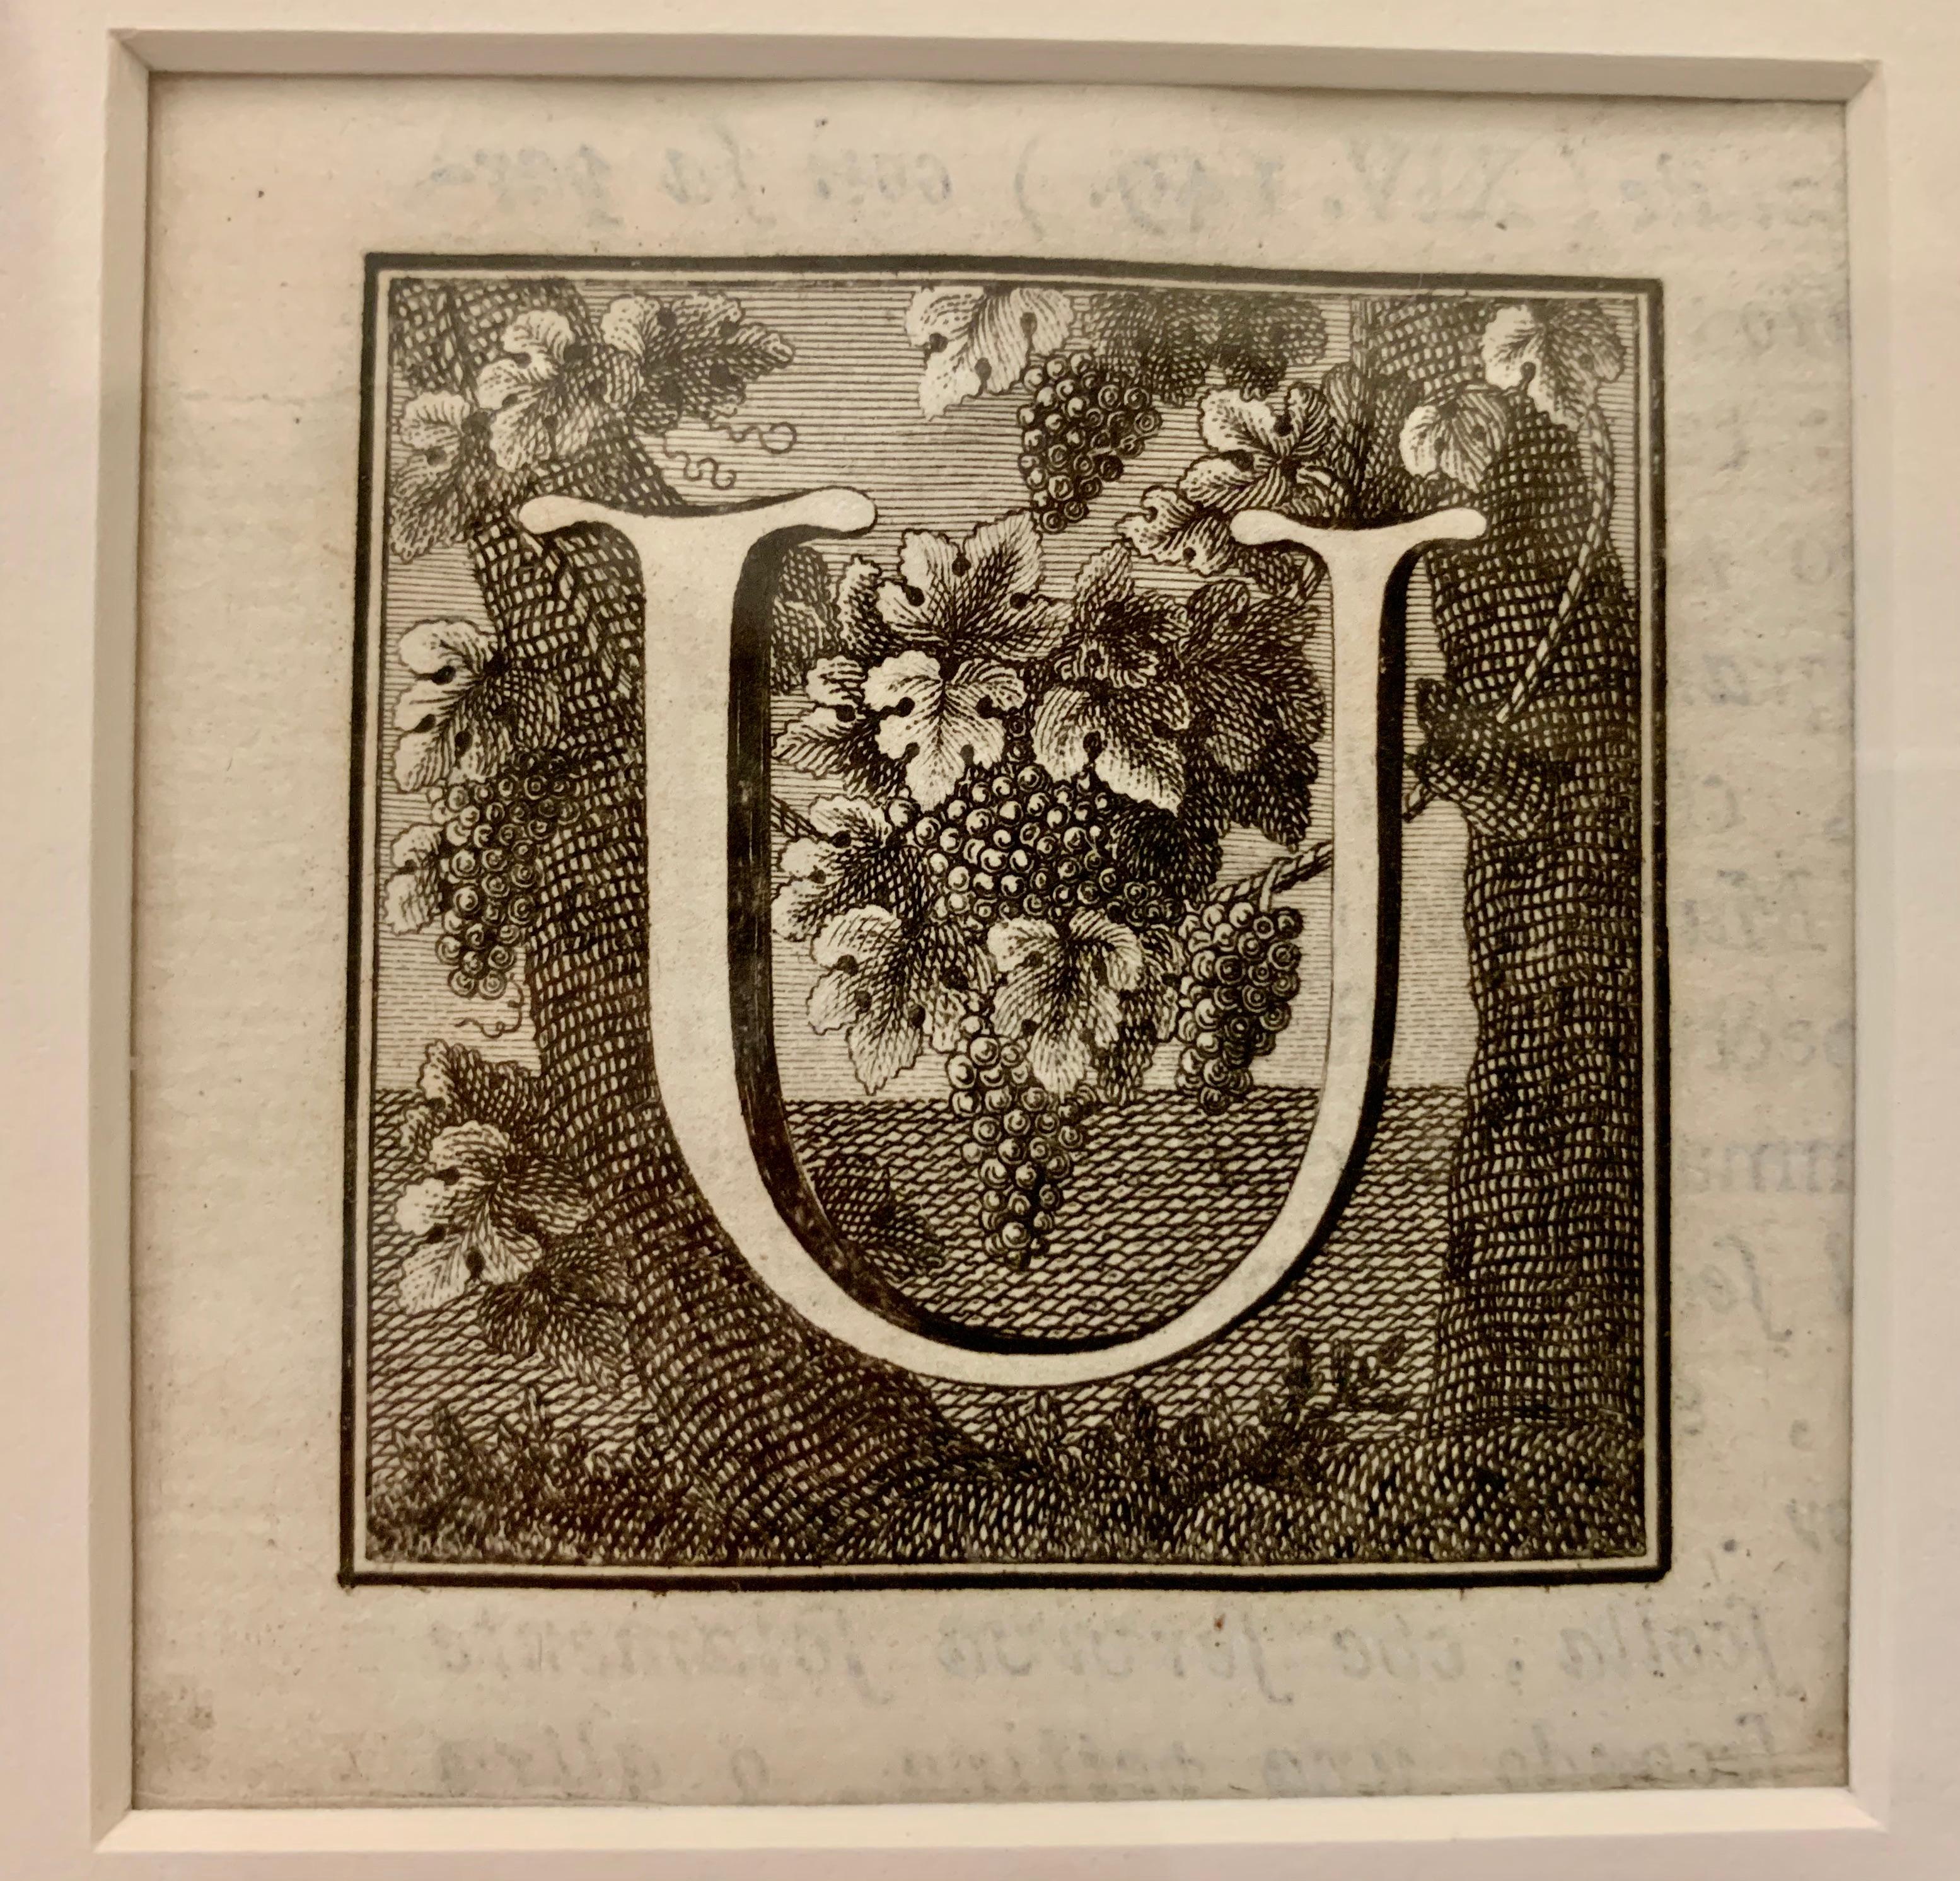 Hand-Crafted Framed Engraving of The Letter 